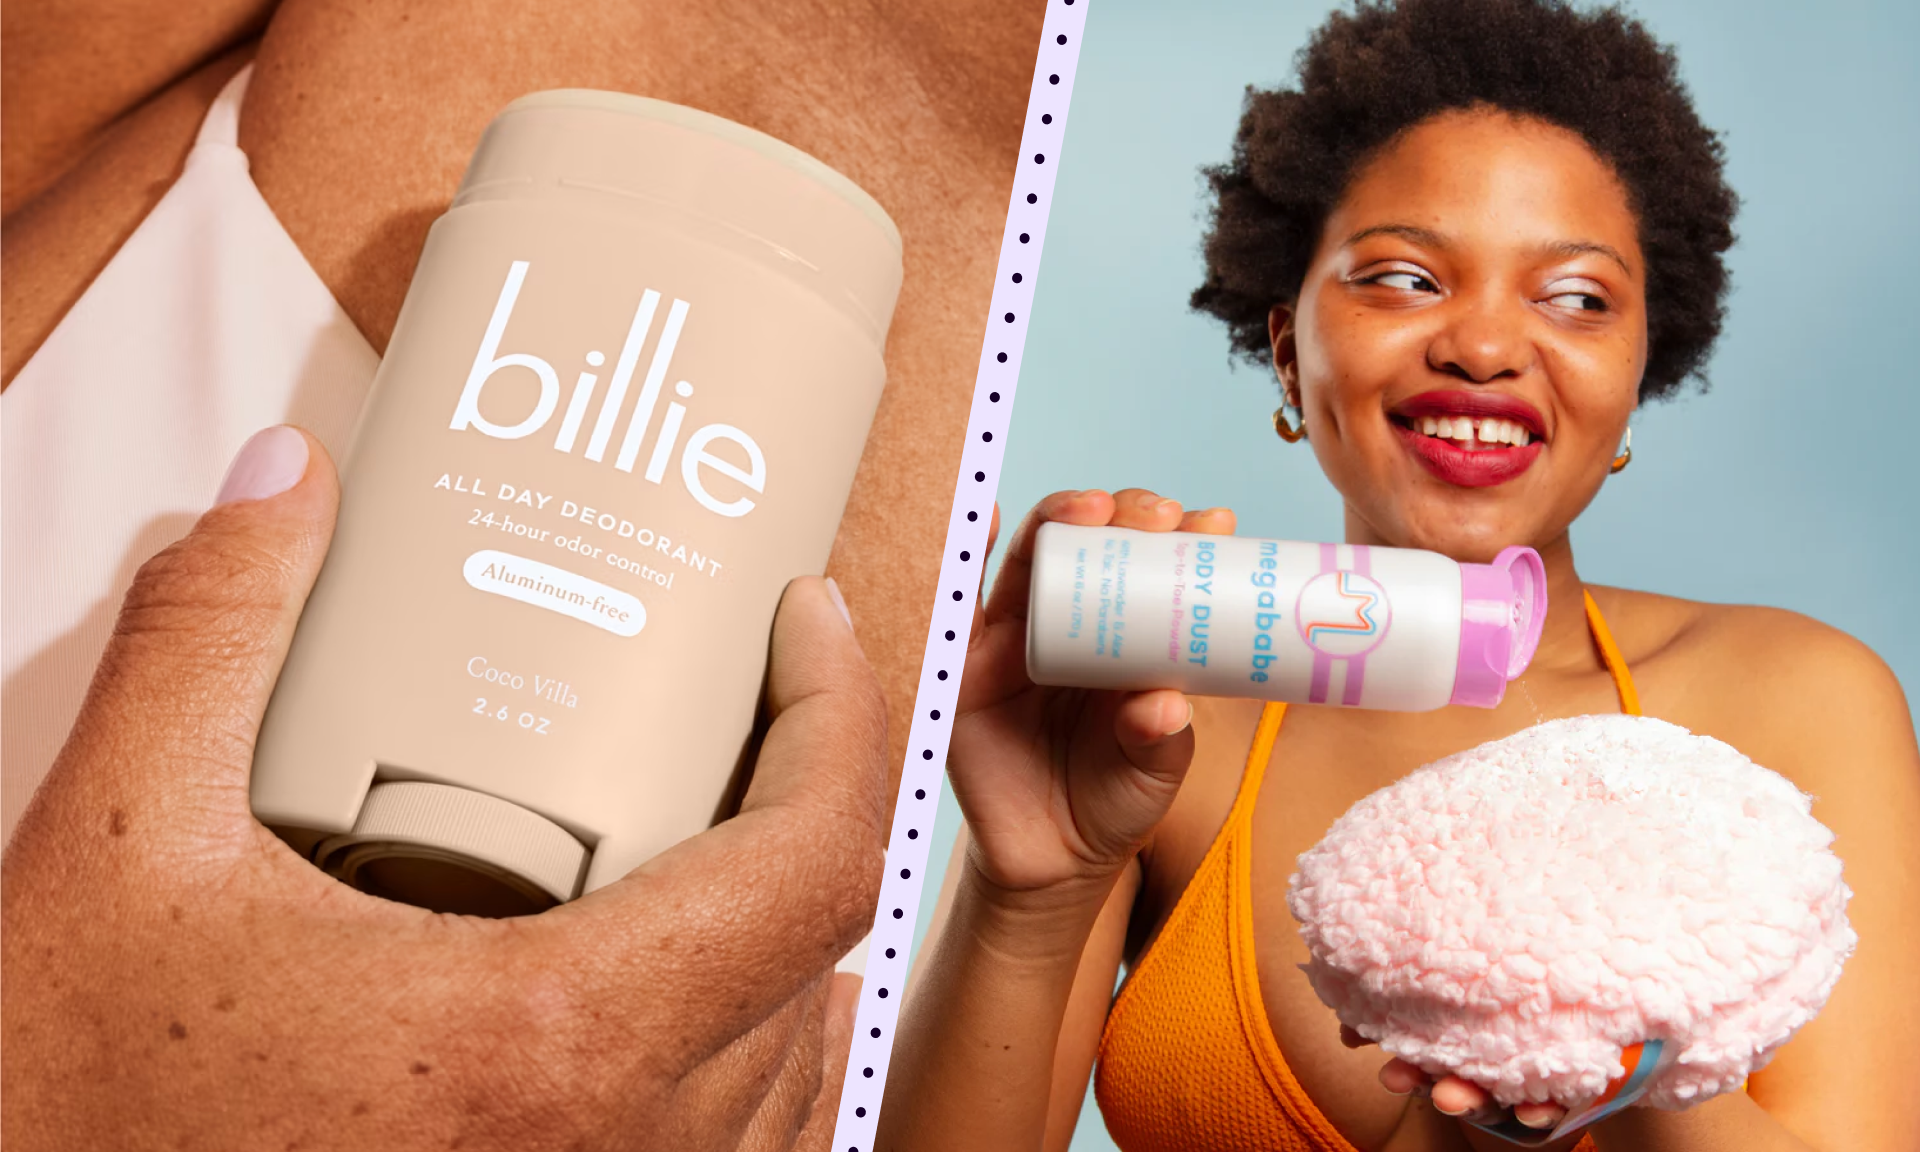 Must-Have products for Sweaty Boobs Season